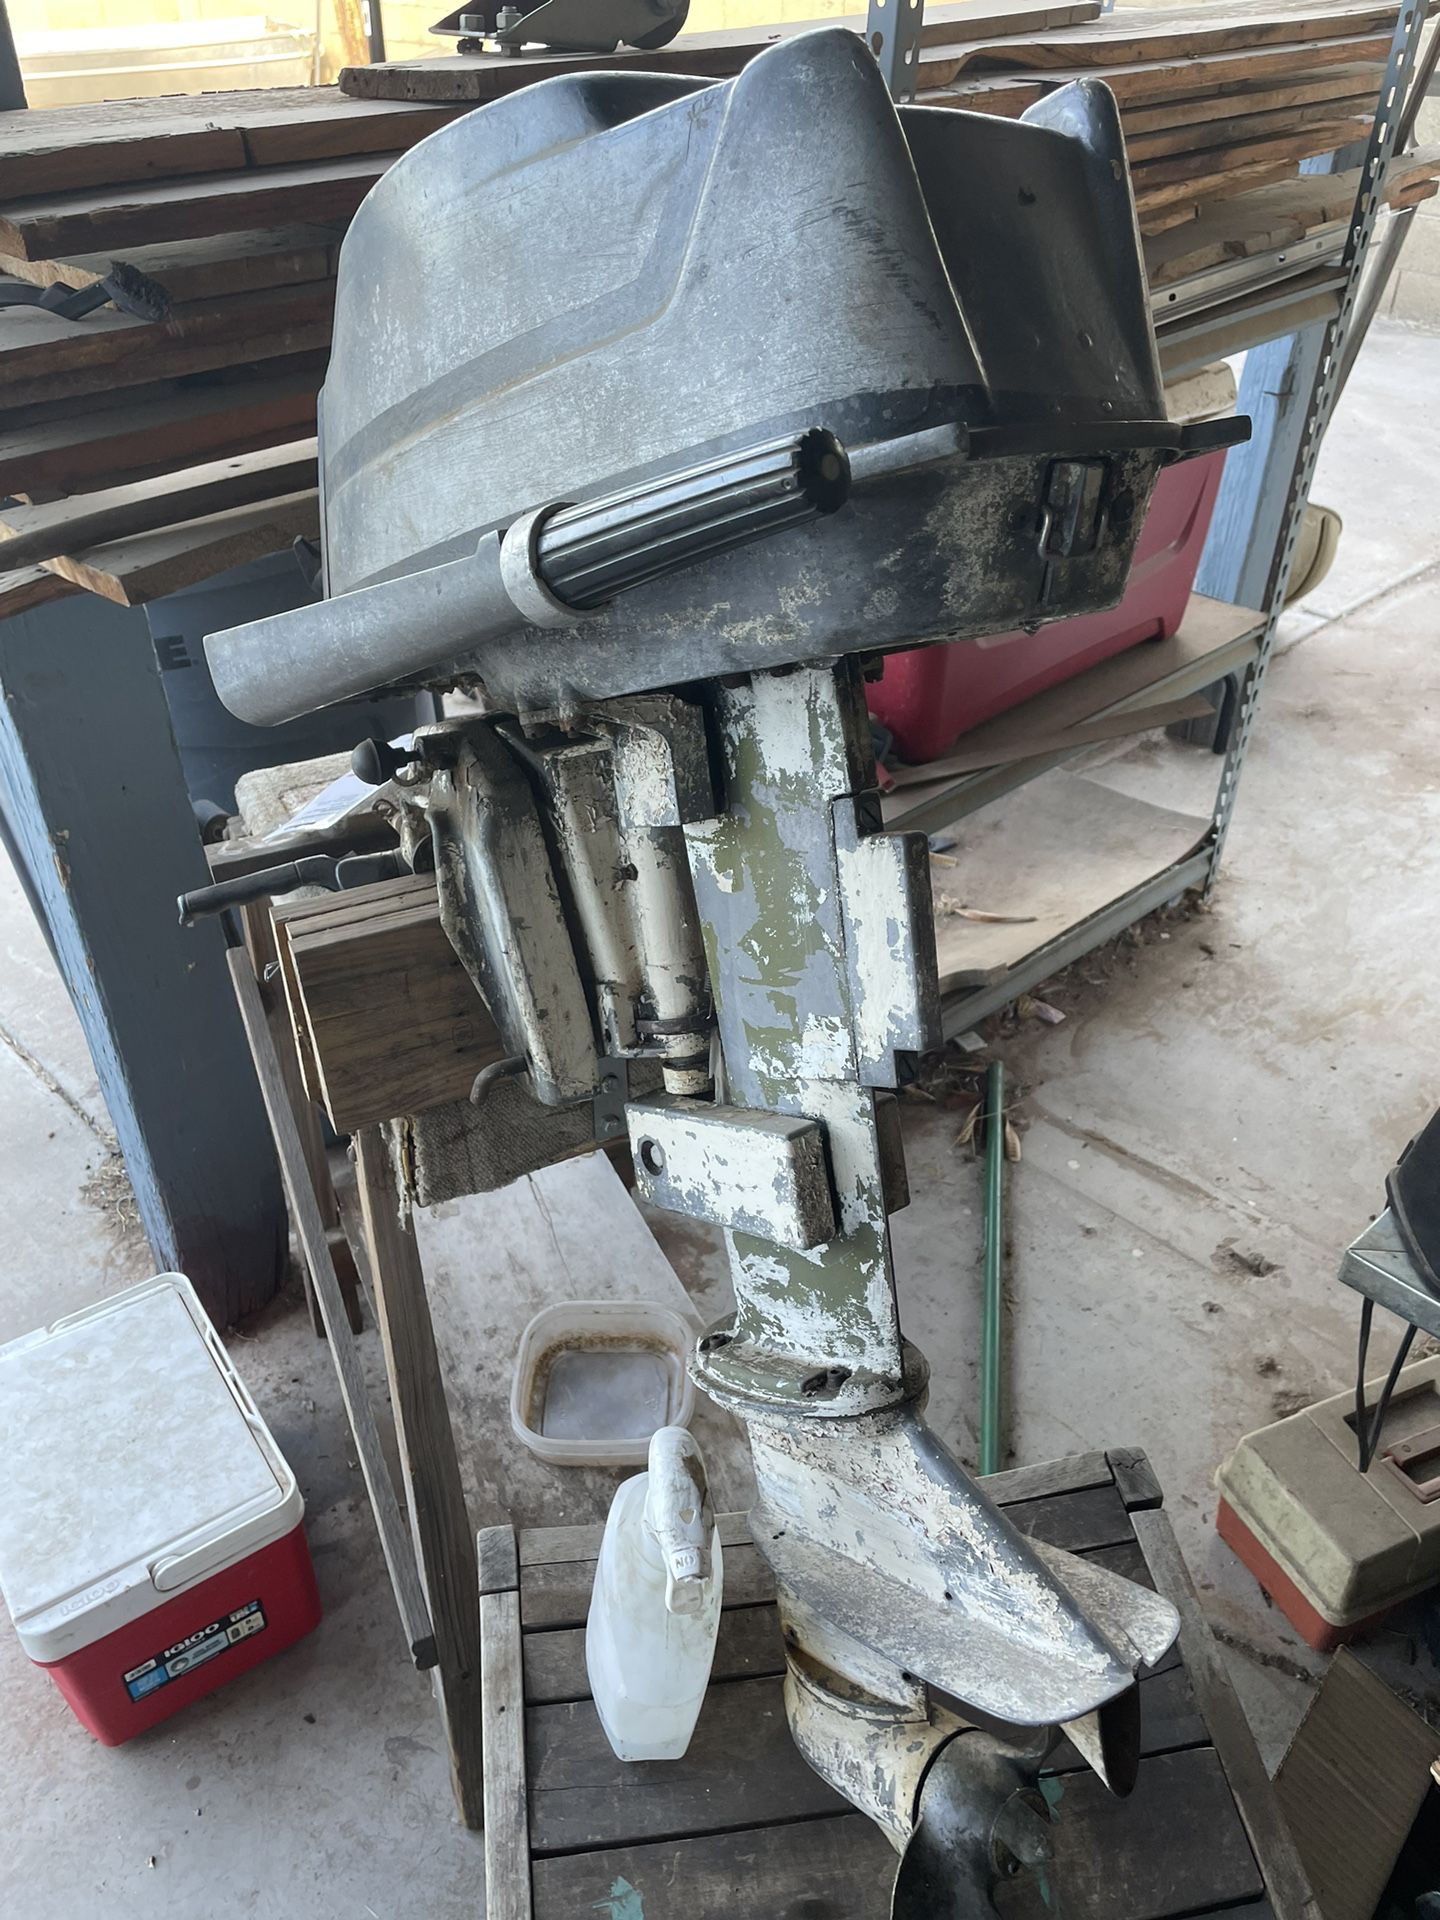 Project Outboard Motors For Sale